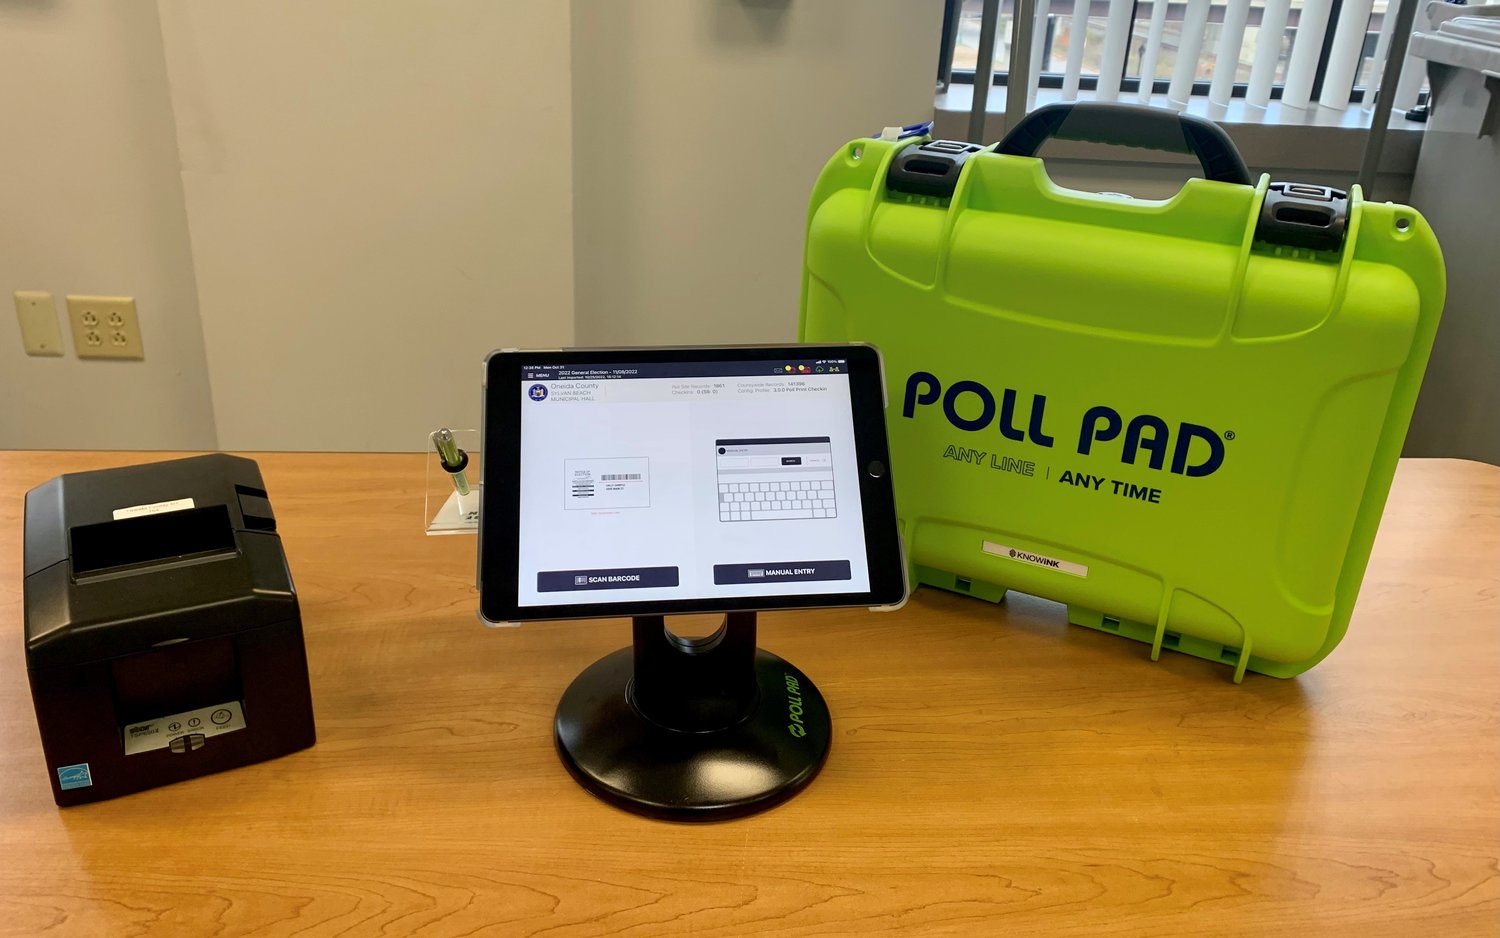 One of the new iPad election poll books is shown at the Oneida County Board of Elections recently. The county is rolling out electronic poll books to make voter check-in and signature verification uniform, officials say.